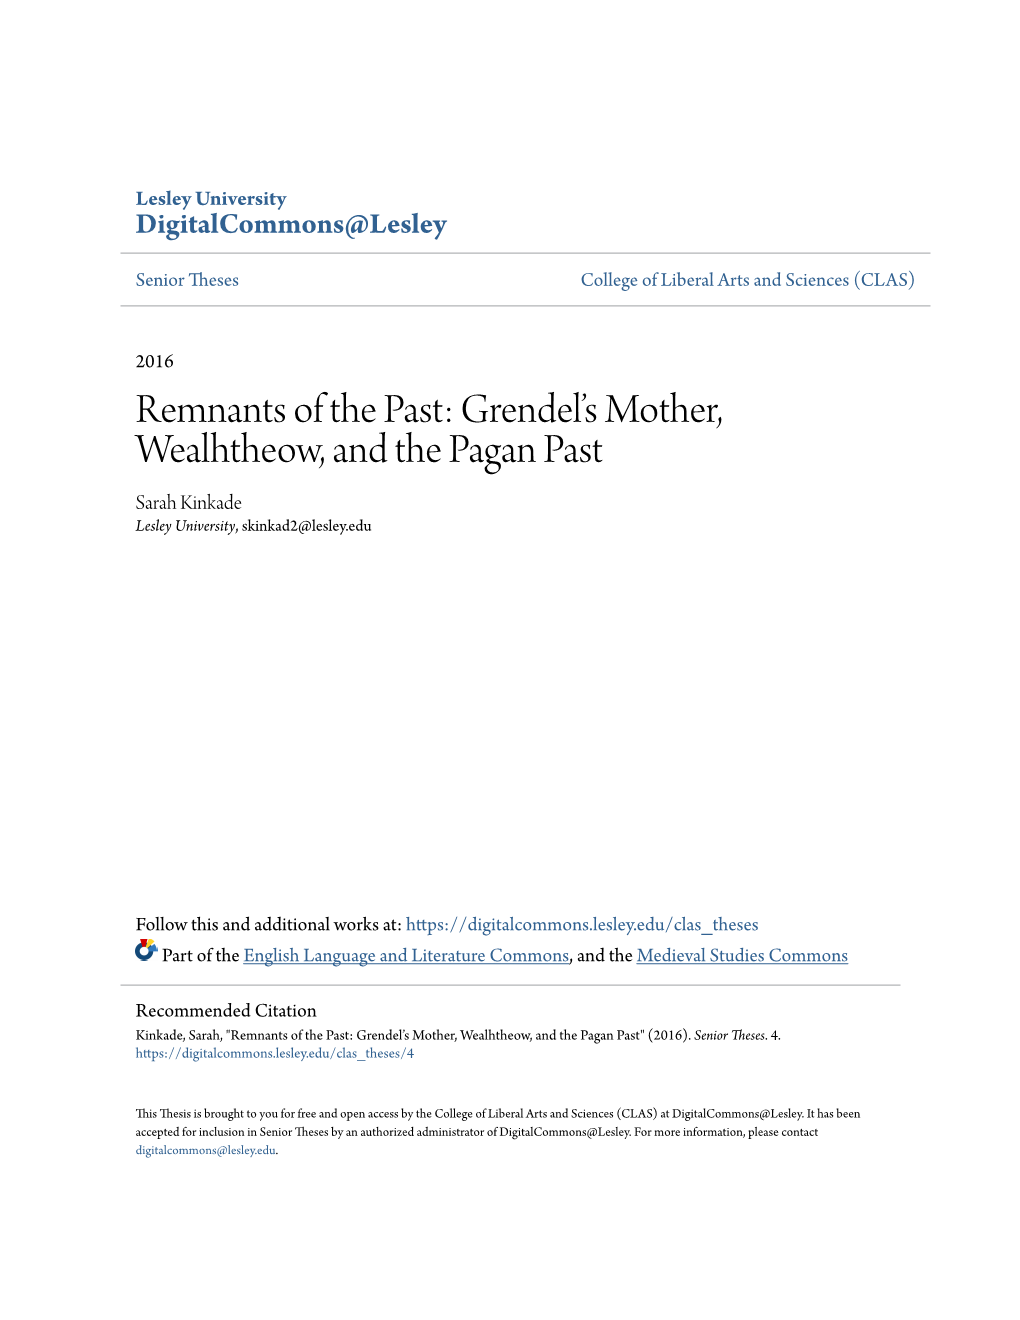 Grendel's Mother, Wealhtheow, and the Pagan Past